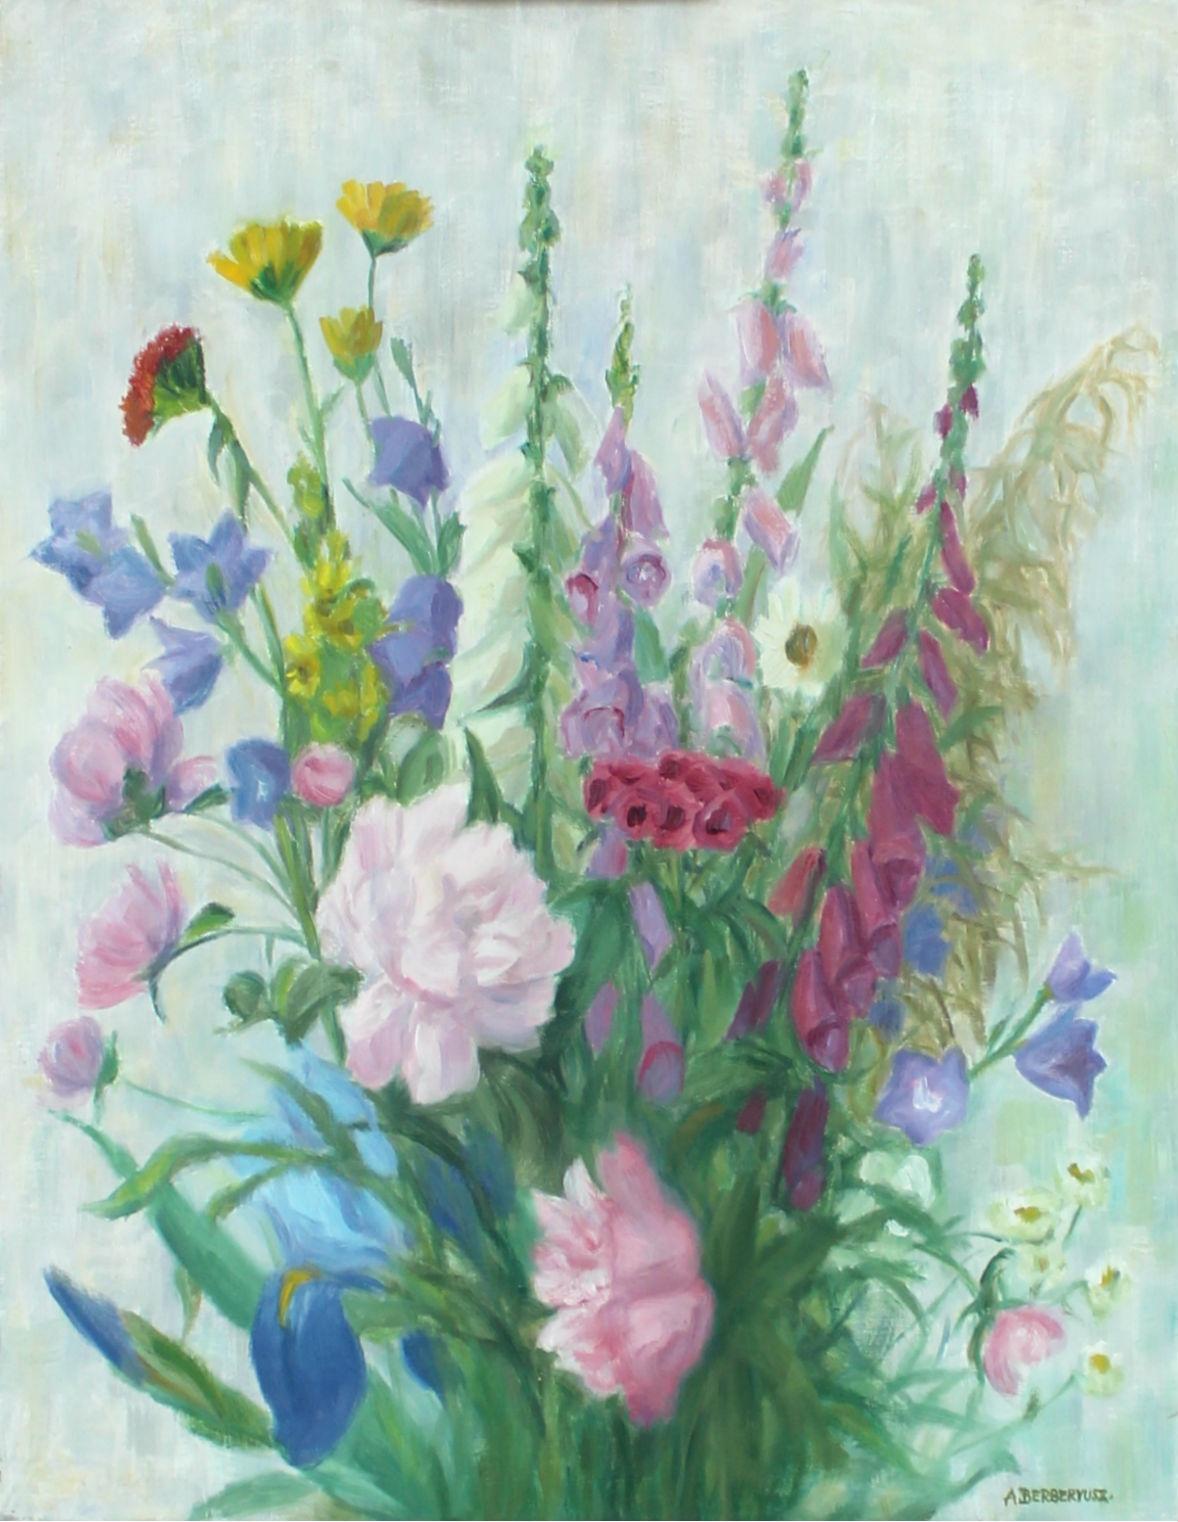 Spring flowers - XX Century, Still-life Oil Painting, Colorful, Bright Colors - Art by Alicja Berberyusz